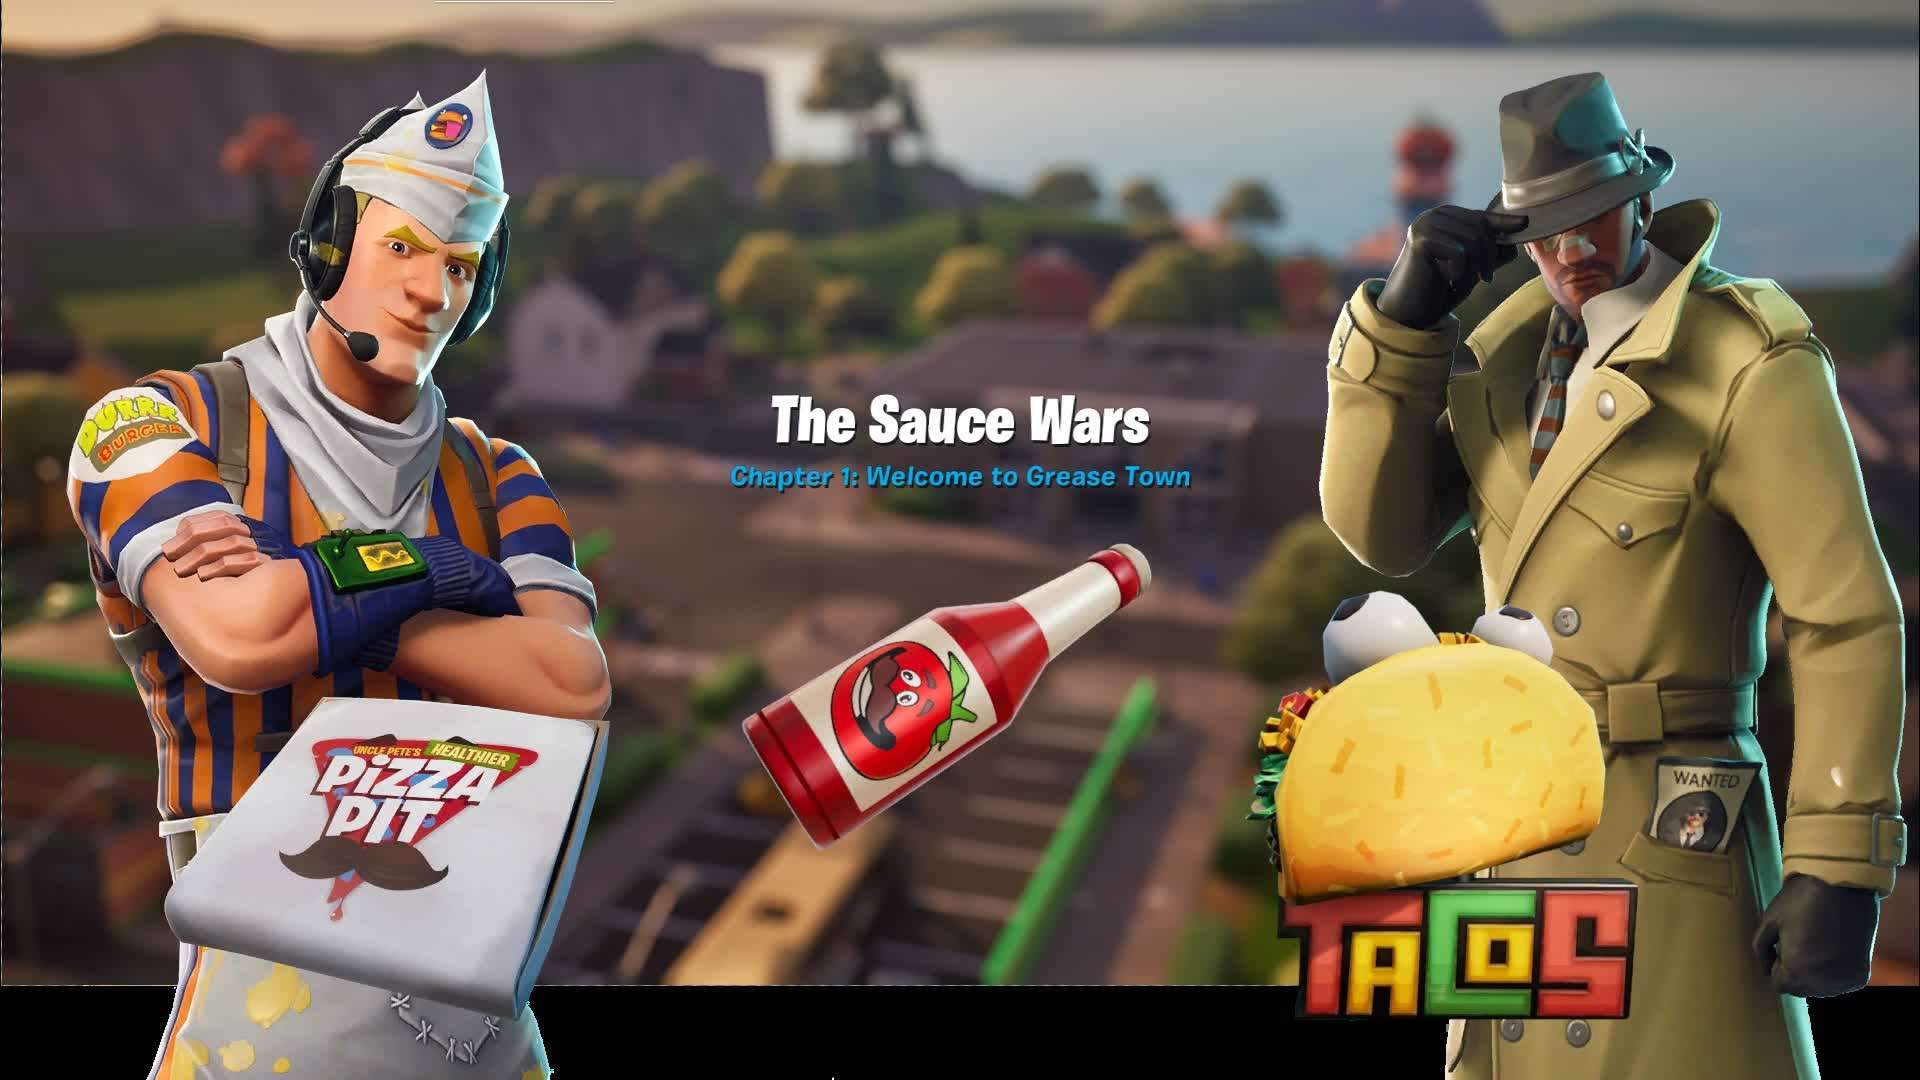 The Sauce Wars - Chapter 1: Grease Town